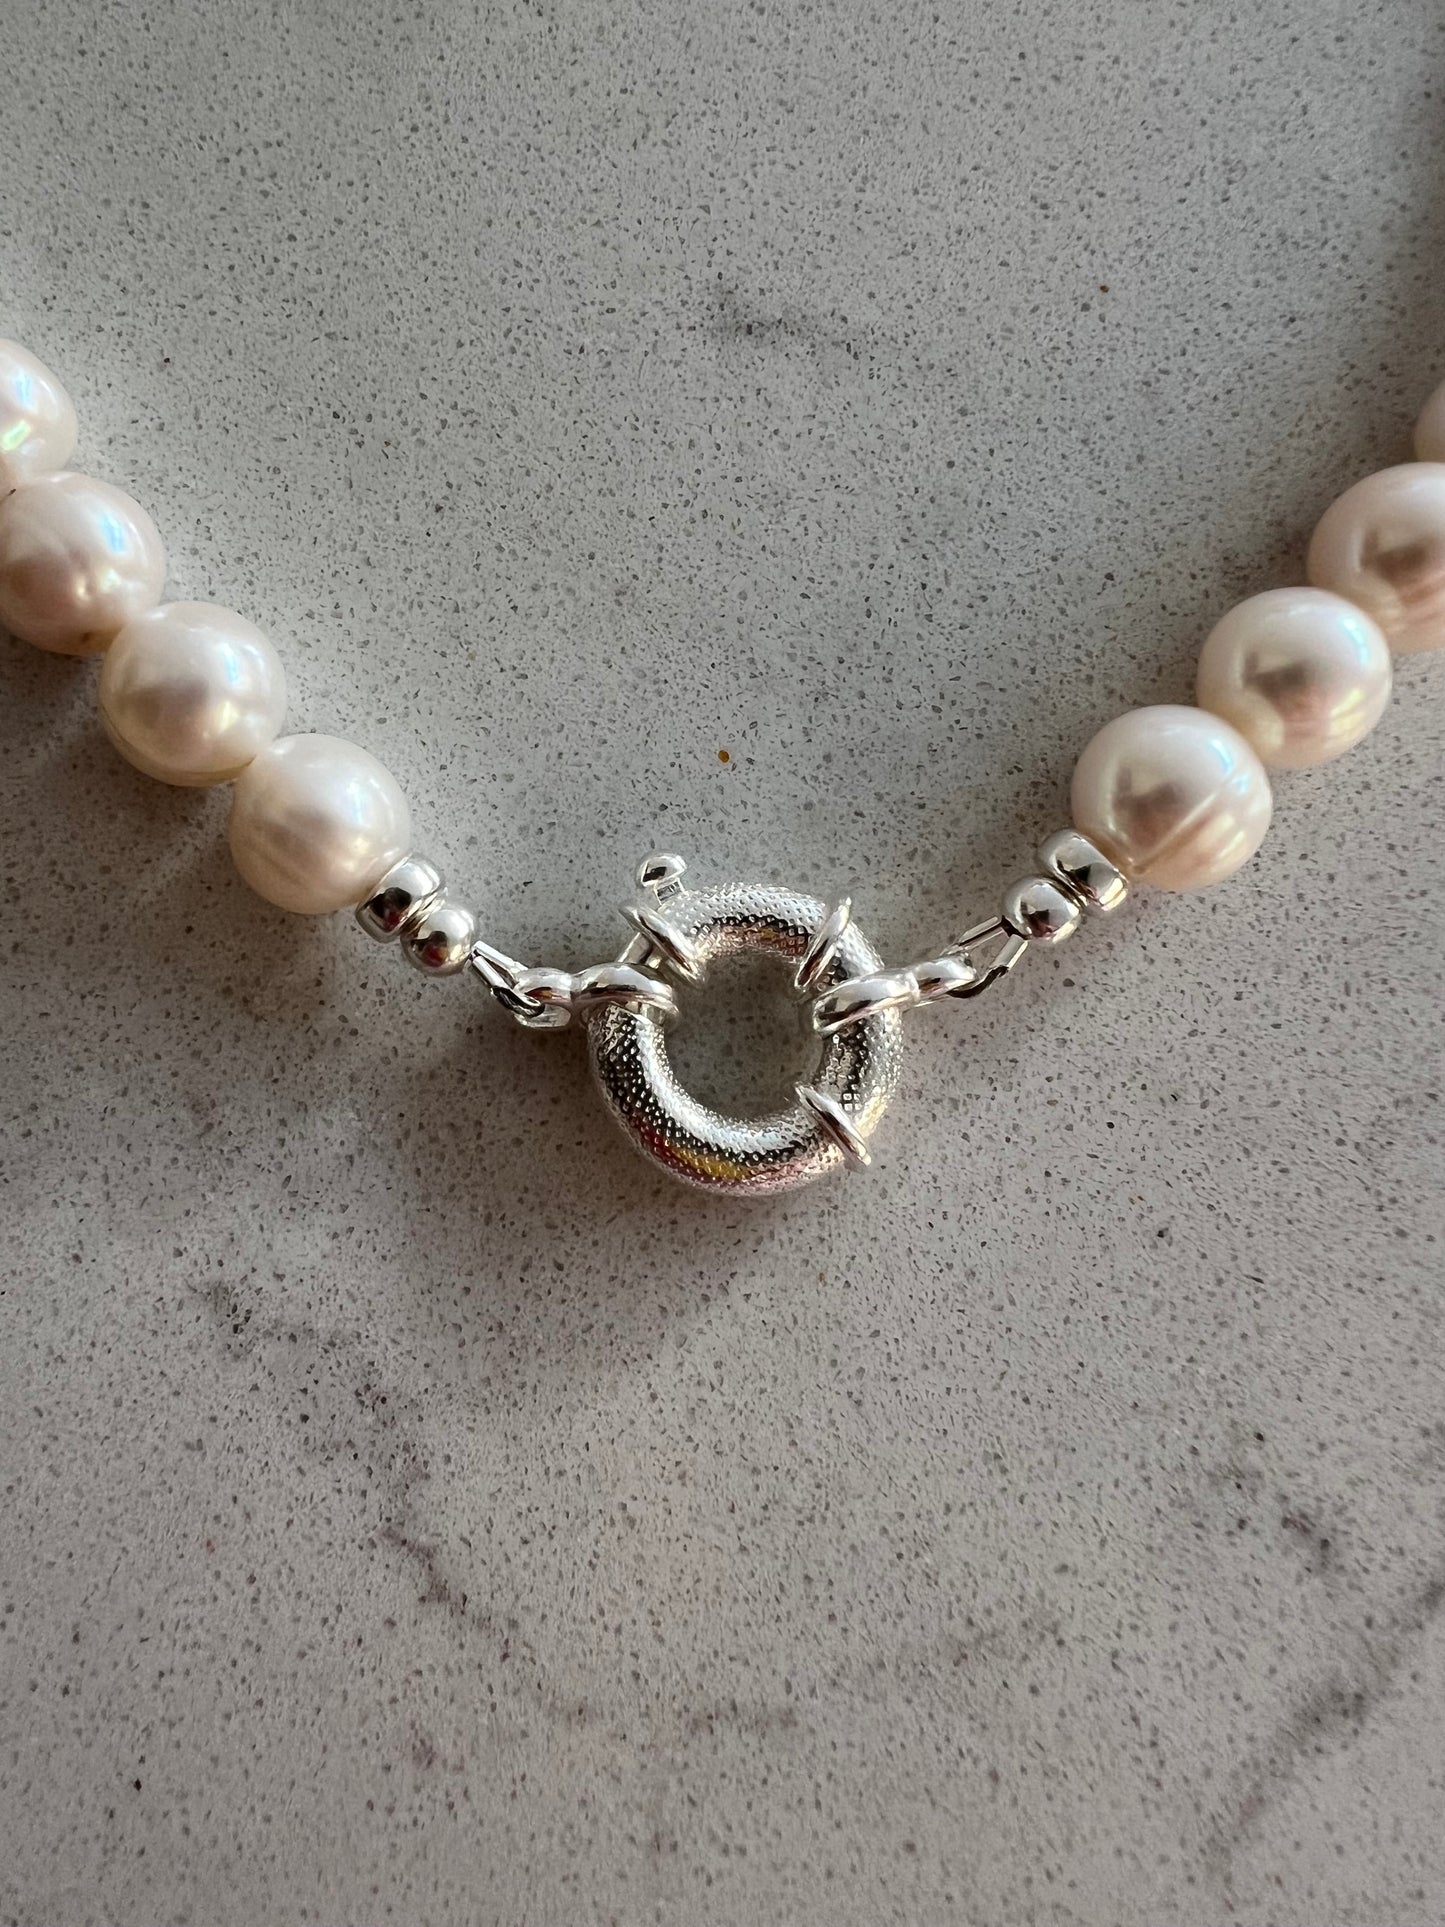 Chunky Pearl Necklace with Jumbo Clasp